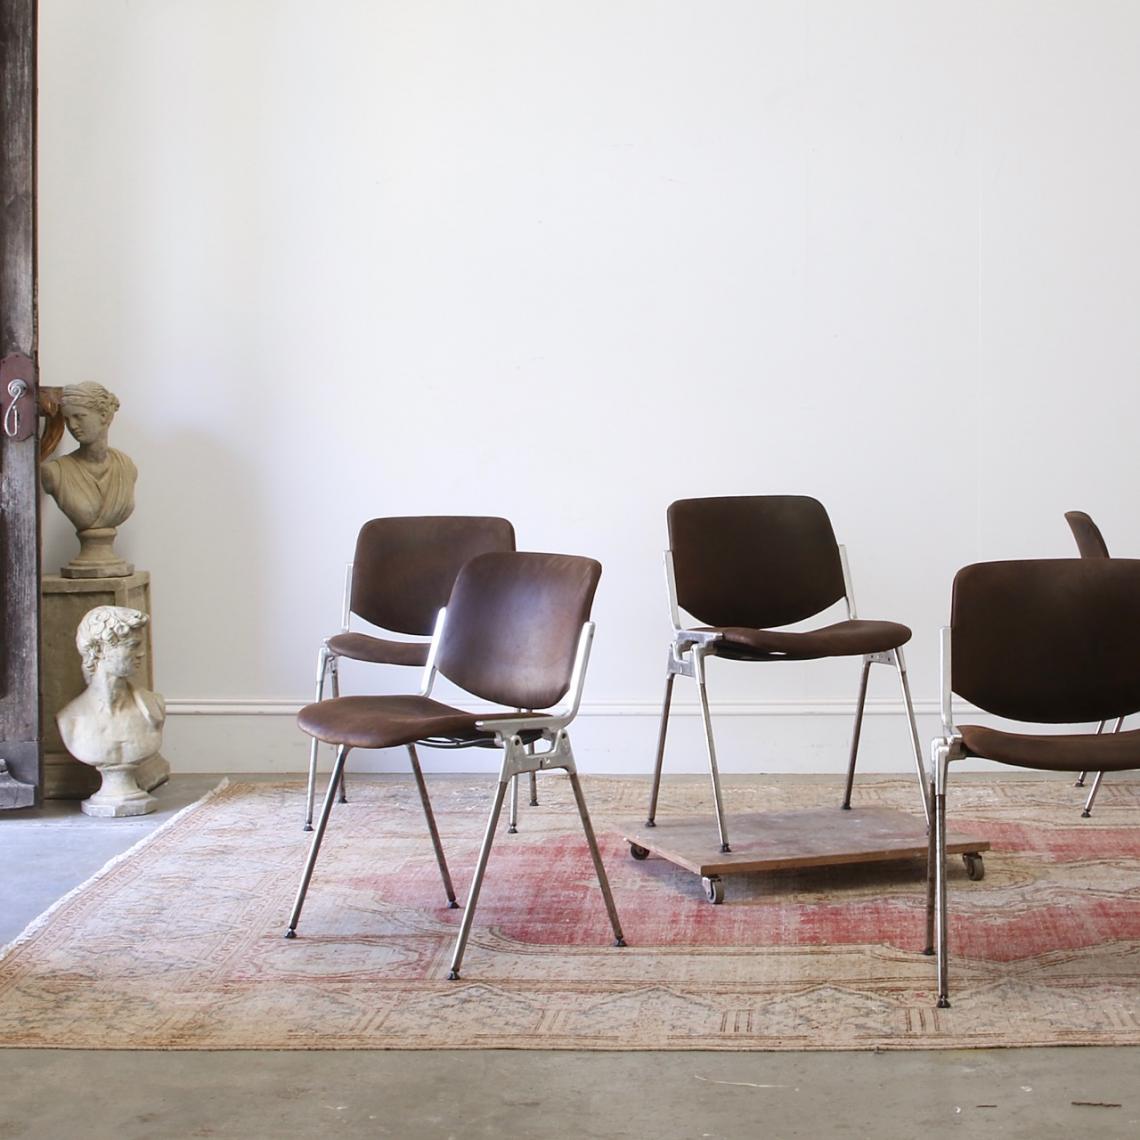 118-6 - Castelli Chairs // Molasses leather